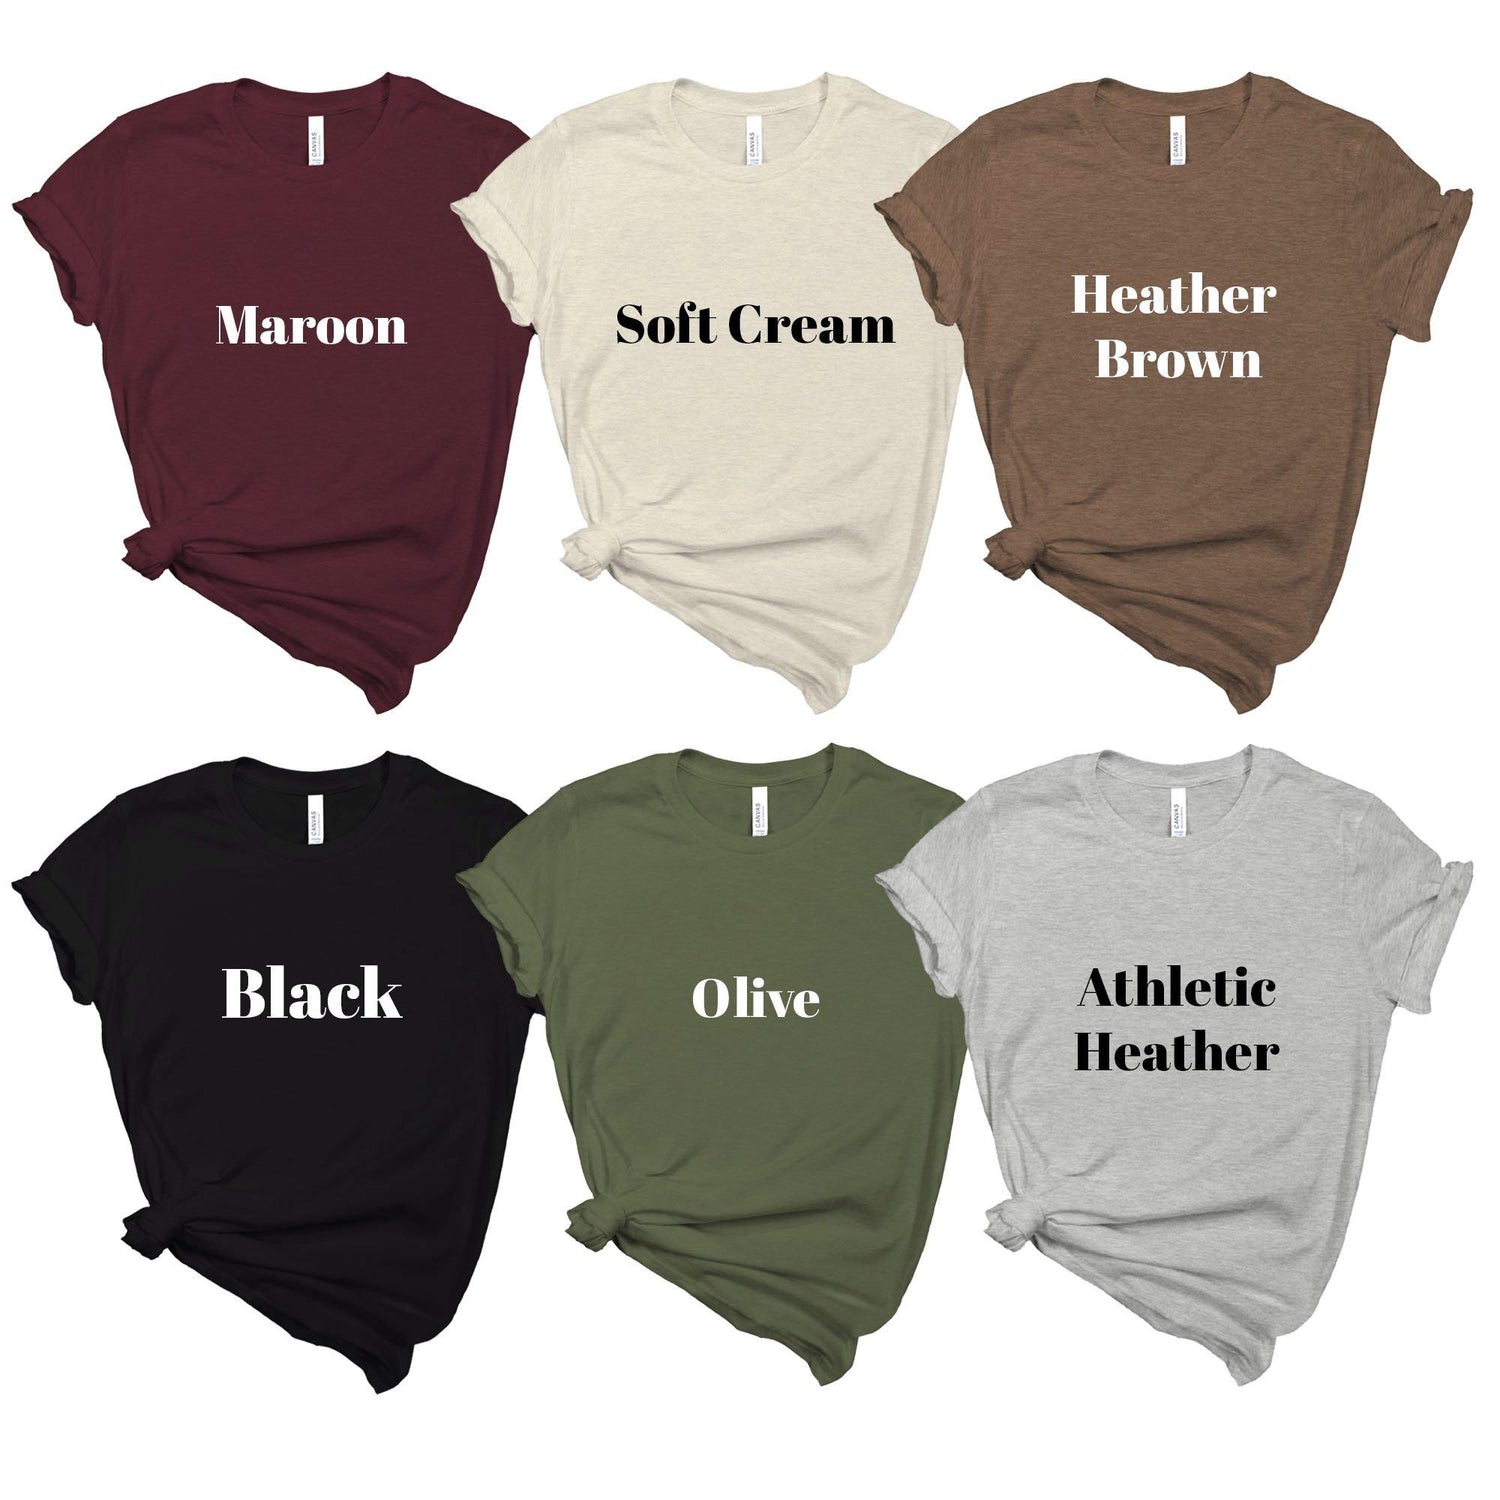 Family Thanksgiving Shirts - Customizable - I Was Told There'd Be - Family Holiday Shirts - Group Shirts - Healthy Wealthy Skinny